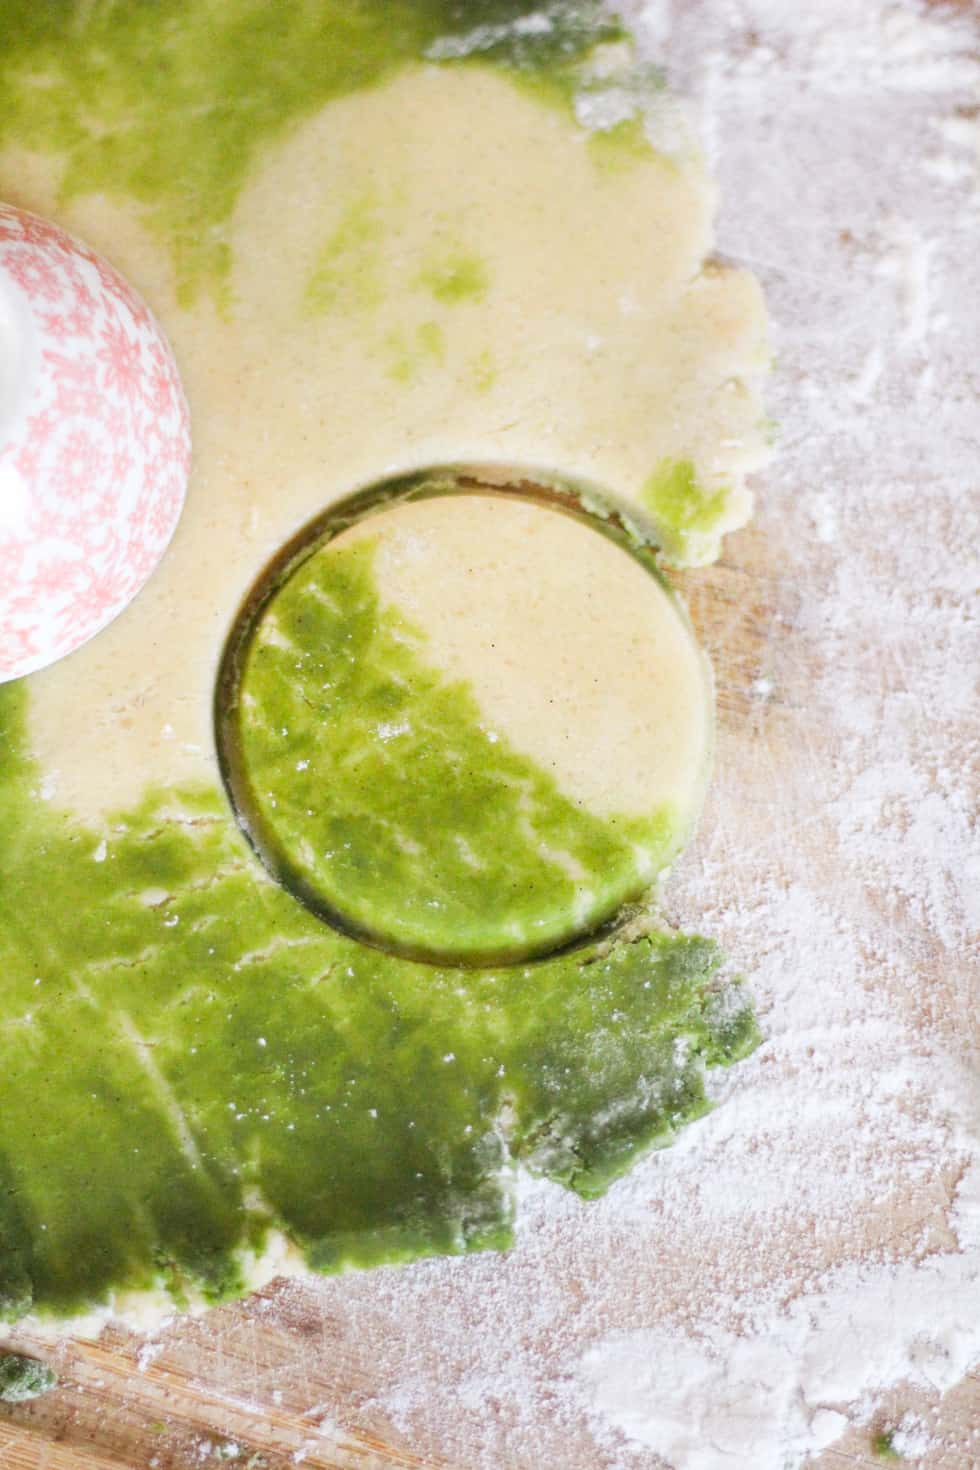 Green and white cookie dough cut into round circle.